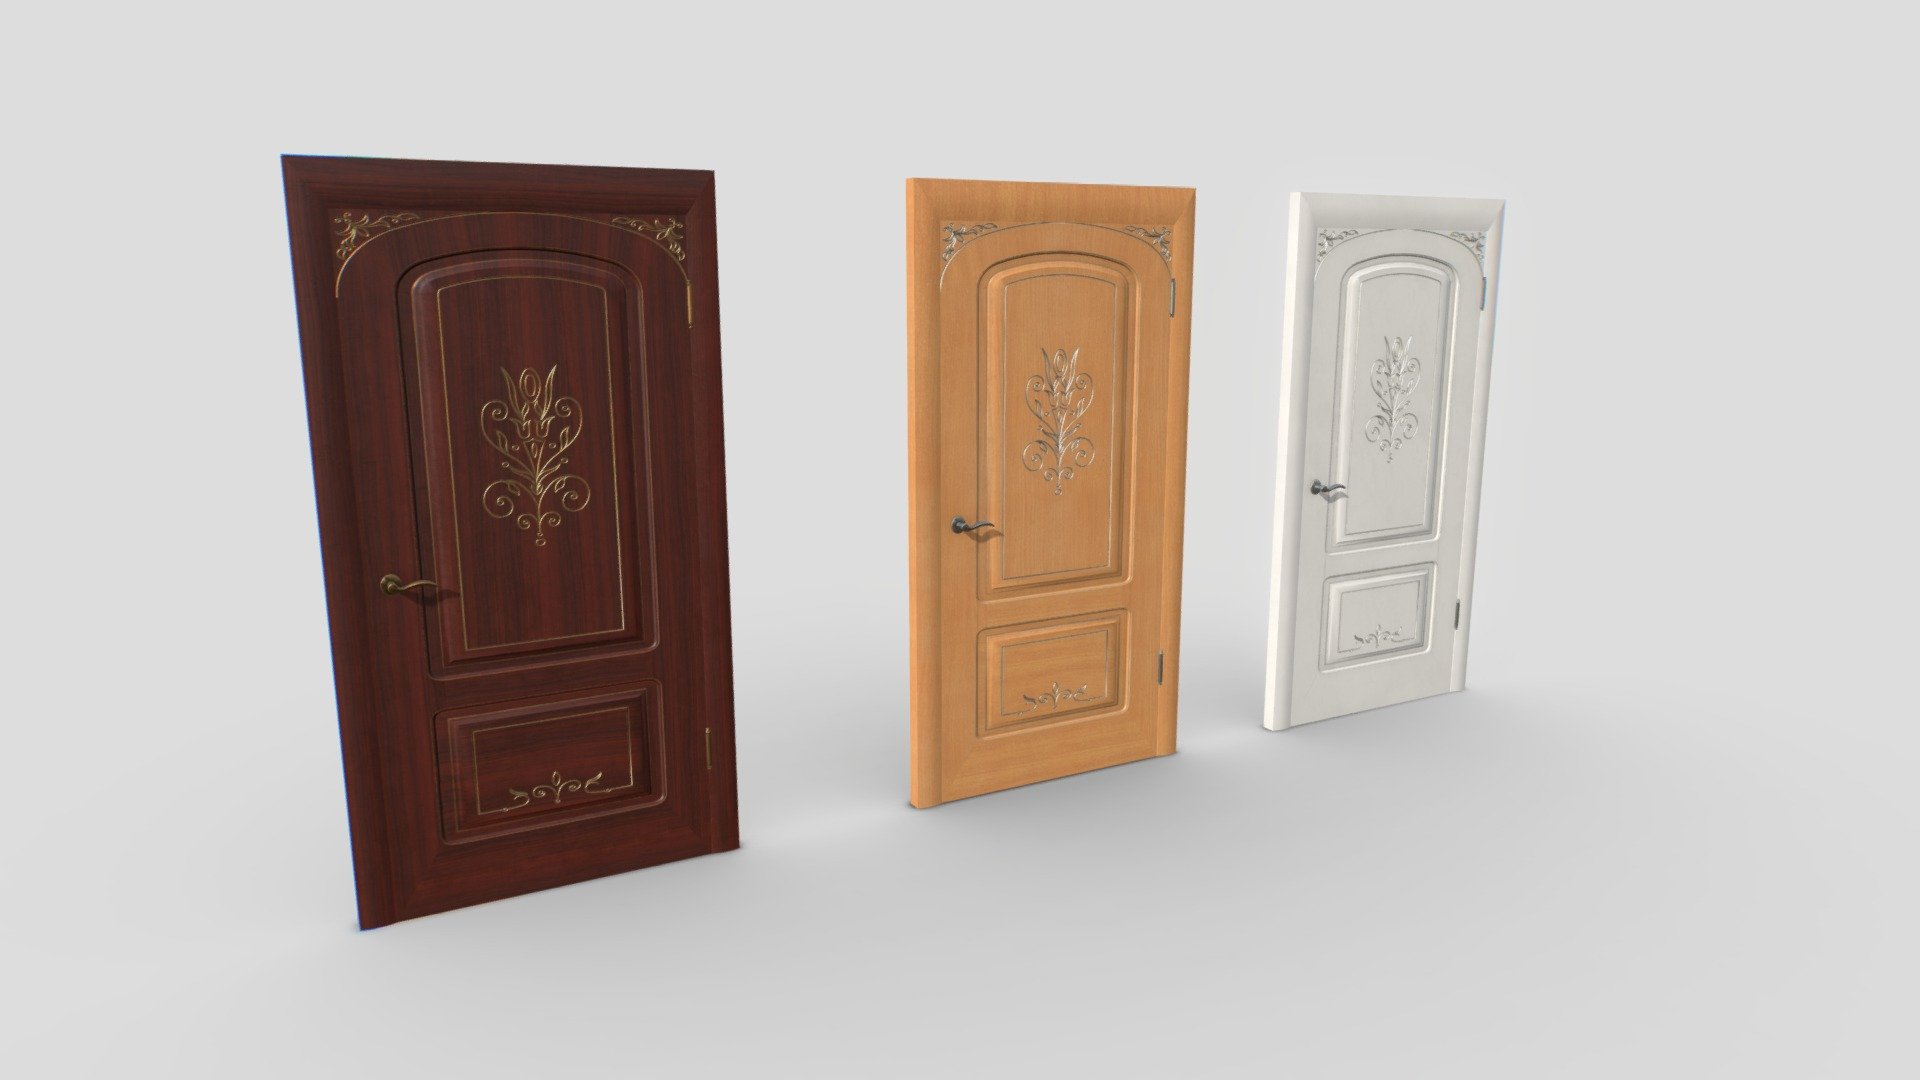 Pack of classic doors. Real scale but scale as you needs. 1 material and 3 sets of textures for a total of 3 different doors.

Each door comes with frame, door and 2 handles in case they need to be animated.

Comes with 4096x PBR textures including Albedo, Normal, Metalness, Roughness and AO. ARM mask texture included (ao, rough, metal) and also unity HDRP mask.

Total tris 40000. 20000 verts.

Suitable for halls, palaces, offices, etc. 3d model